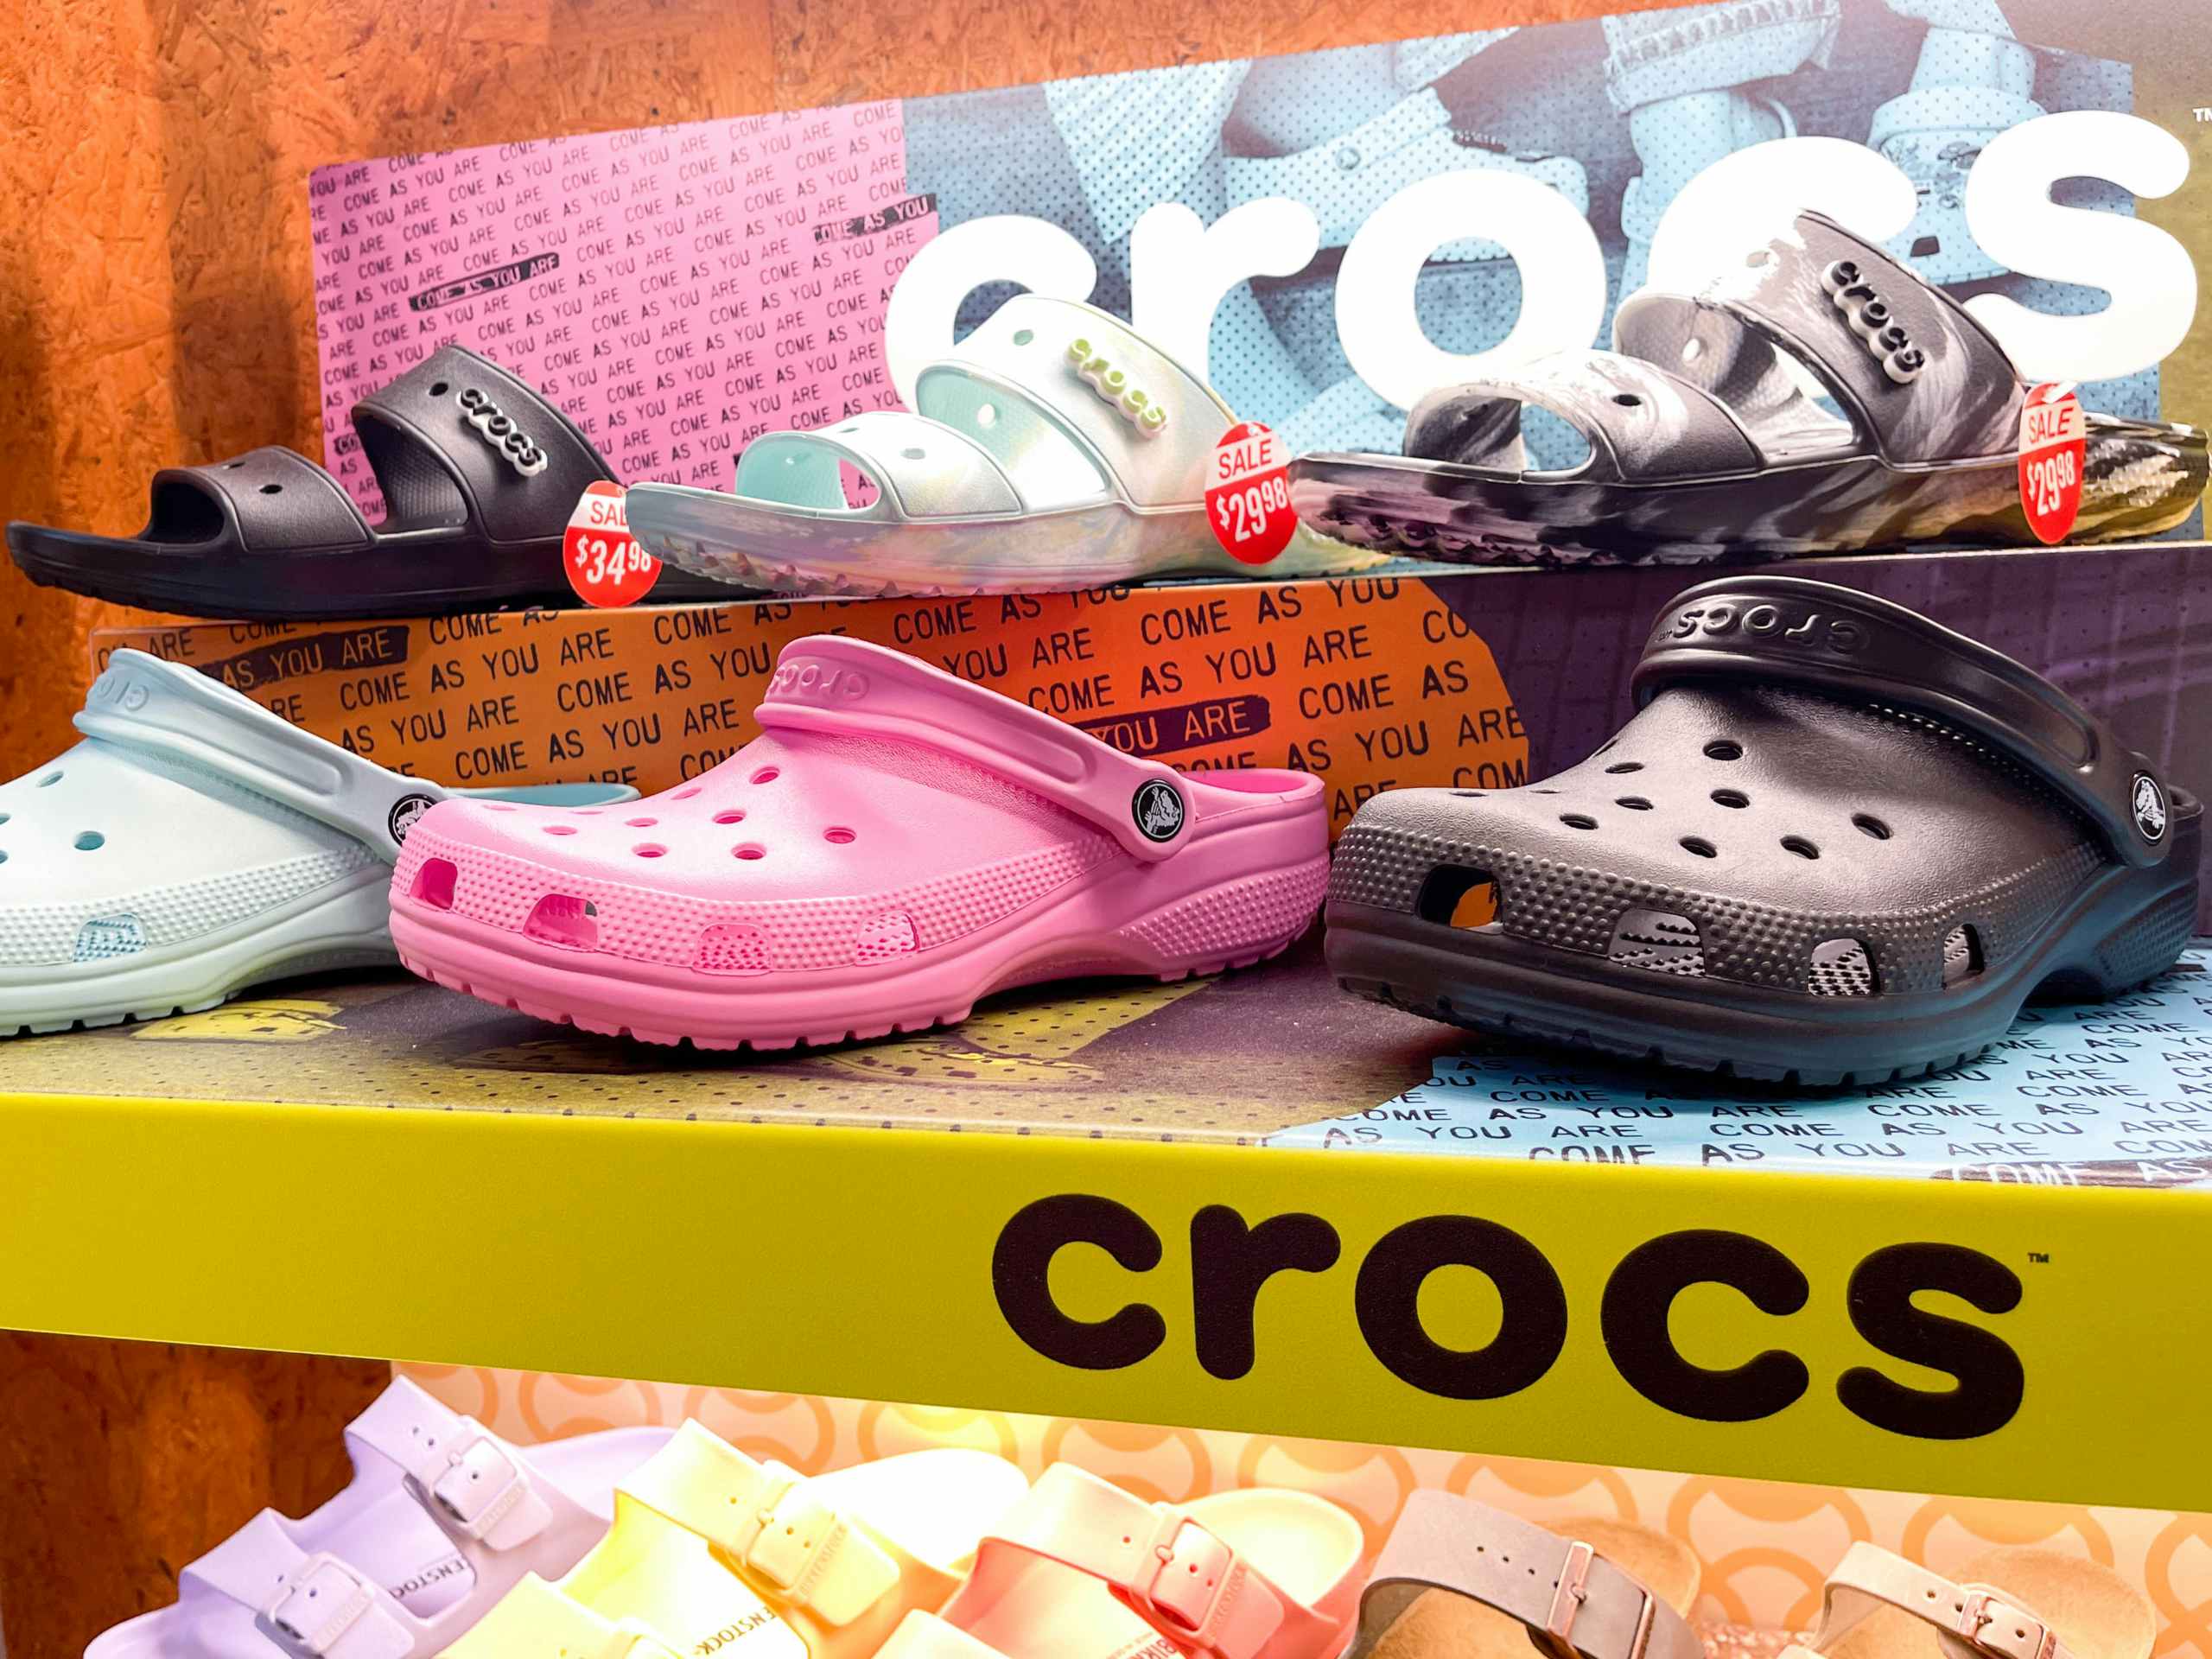 Crocs Adult Shoes, Starting at Just $15.74 for a Limited Time